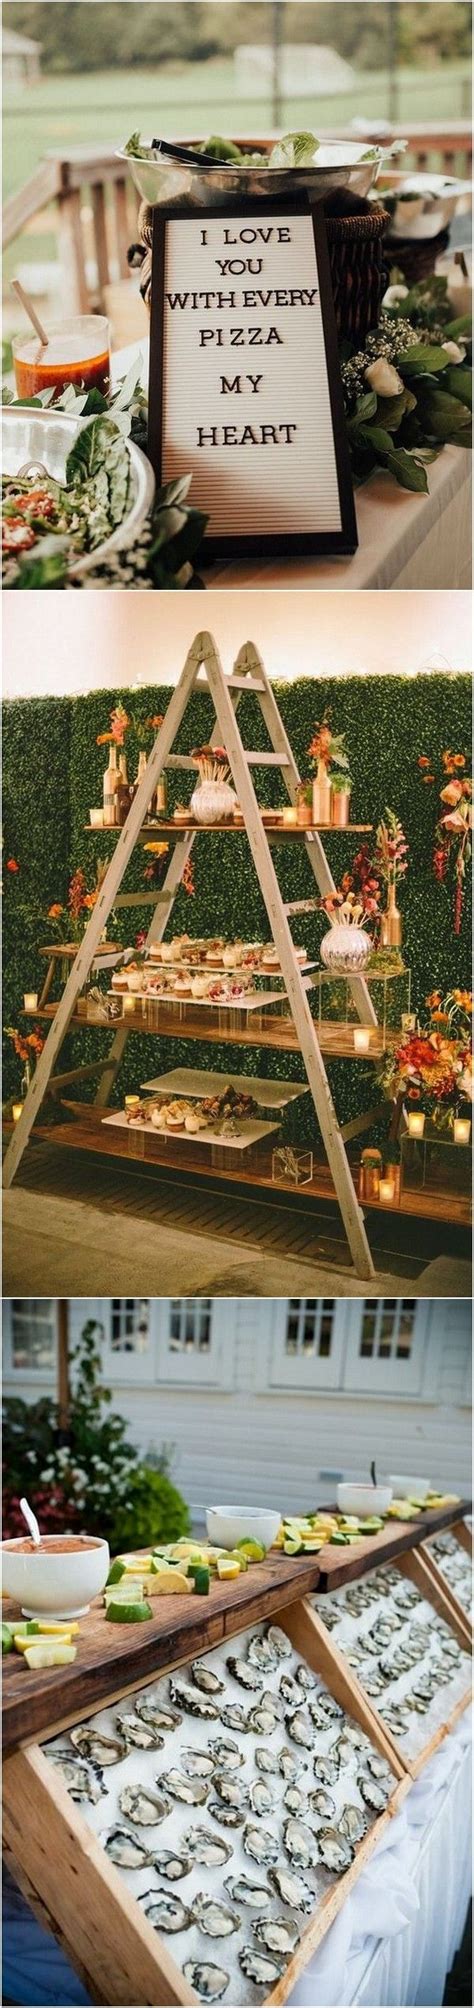 15 Delicious Wedding Food Station Ideas Your Guests Will Love Oh Best